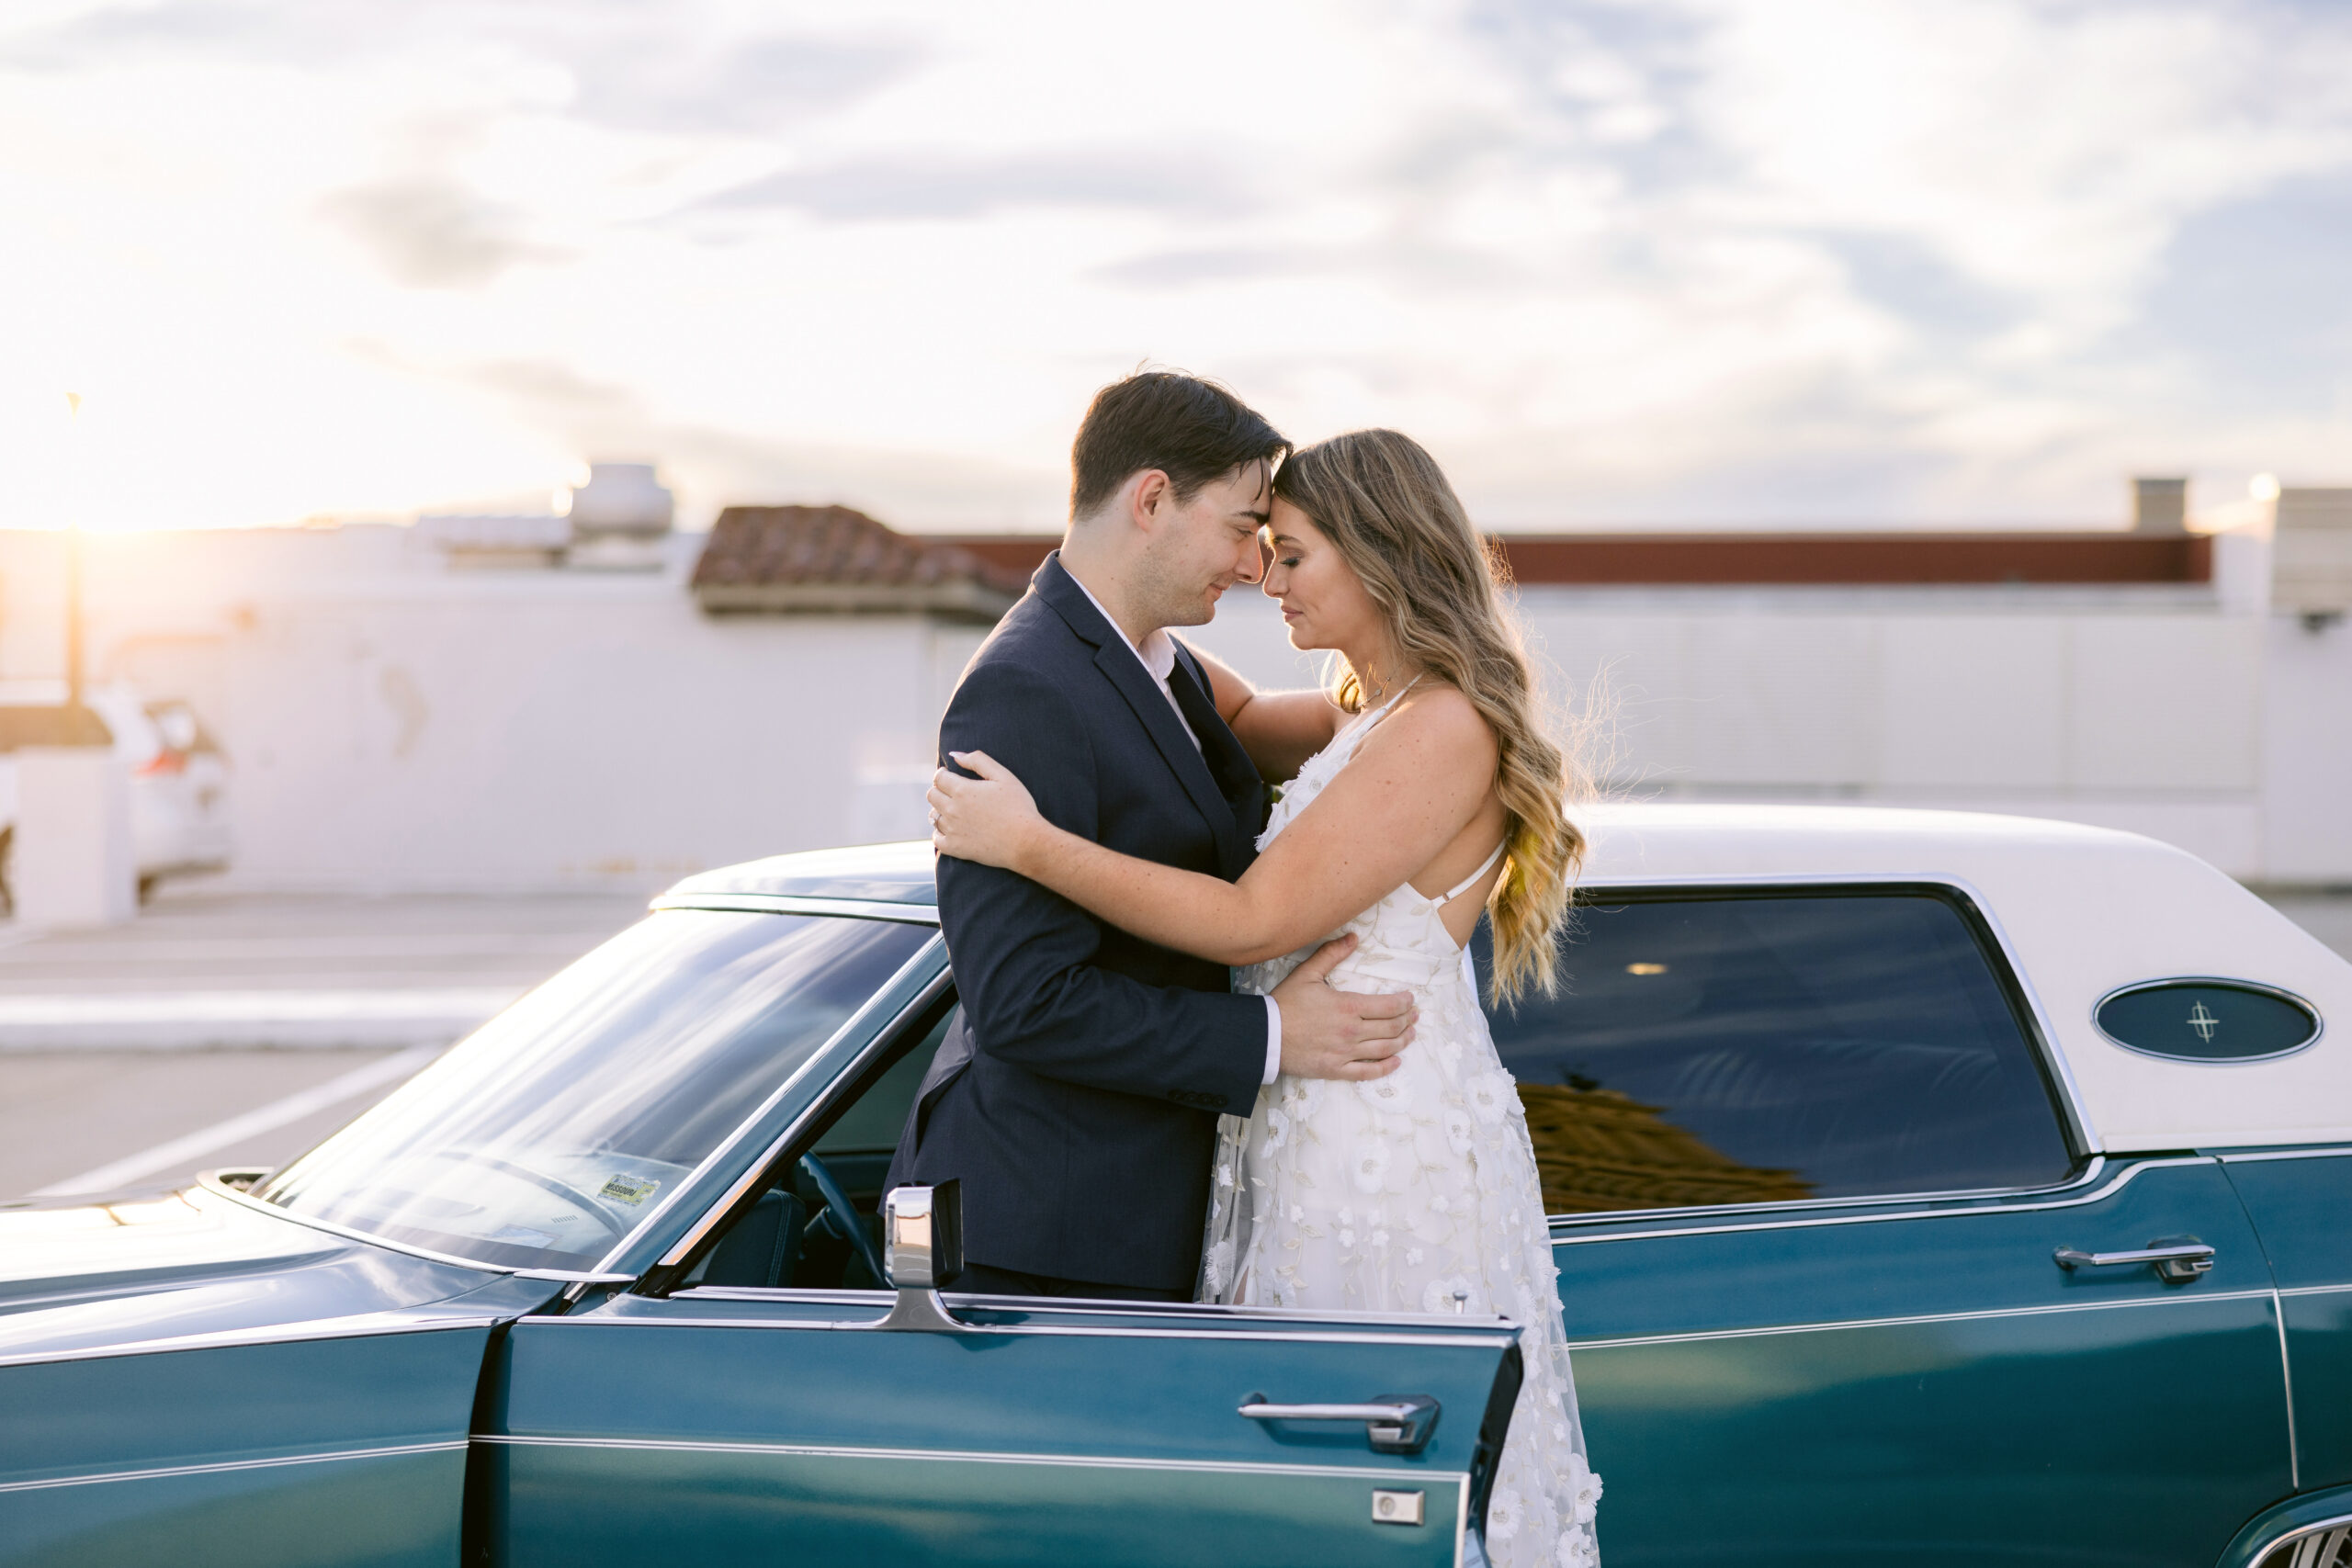 Golden hour vintage car engagement photoshoot by Tatyana Zadorin Photography